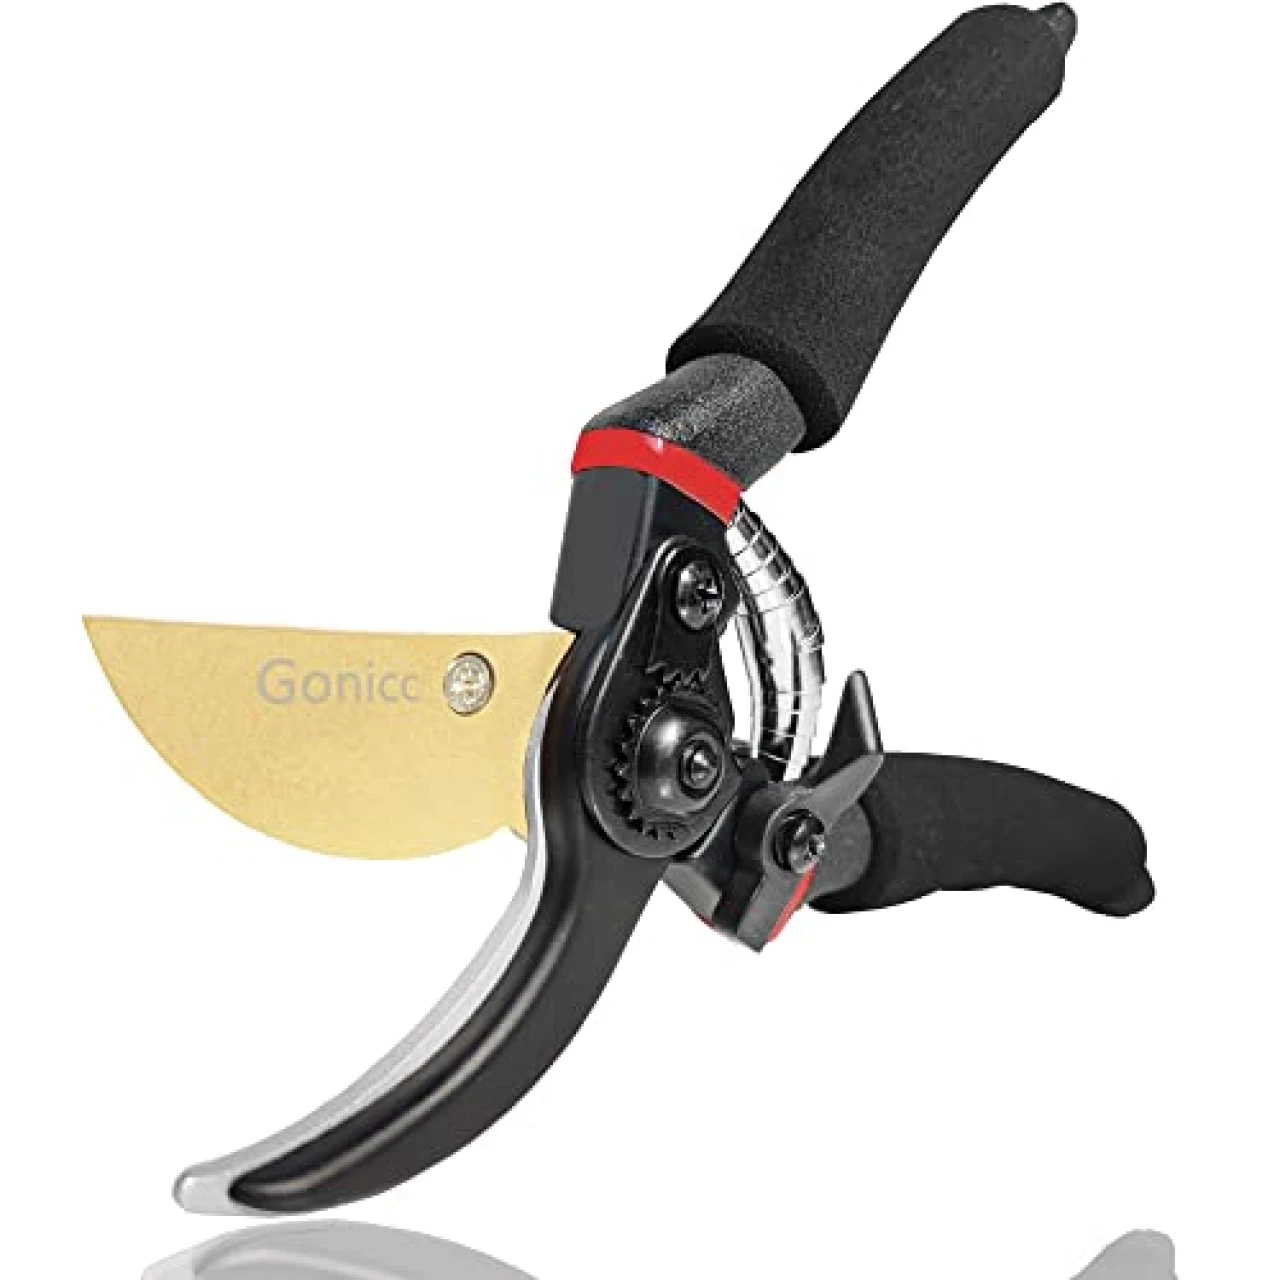 gonicc 8&quot; Professional Premium Titanium Bypass Pruning Shears (GPPS-1003), Hand Pruners, Garden Clippers.